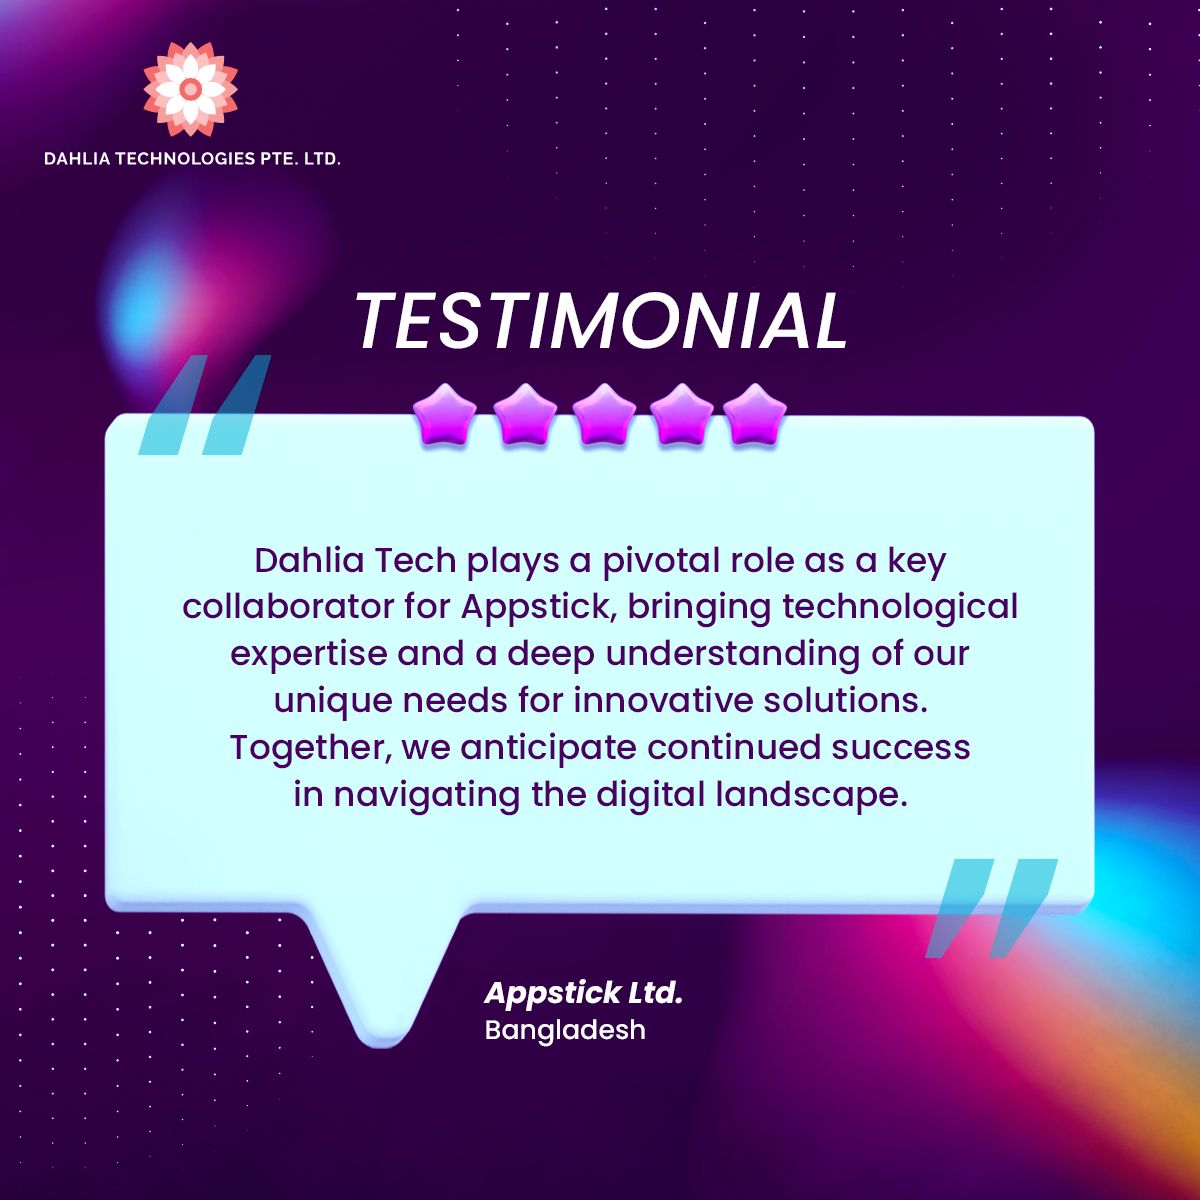 Thanks for your generous testimonial!🙏 
Ready to elevate your business? Contact us today: dahlia.tech 

#InnovativeSolutions #DahliaTech #TechCommunity #ProductivityBoost #TechInnovators #DigitalProductivity #SmartBusiness #BusinessSolutions #DahliaTechnologies #Tech